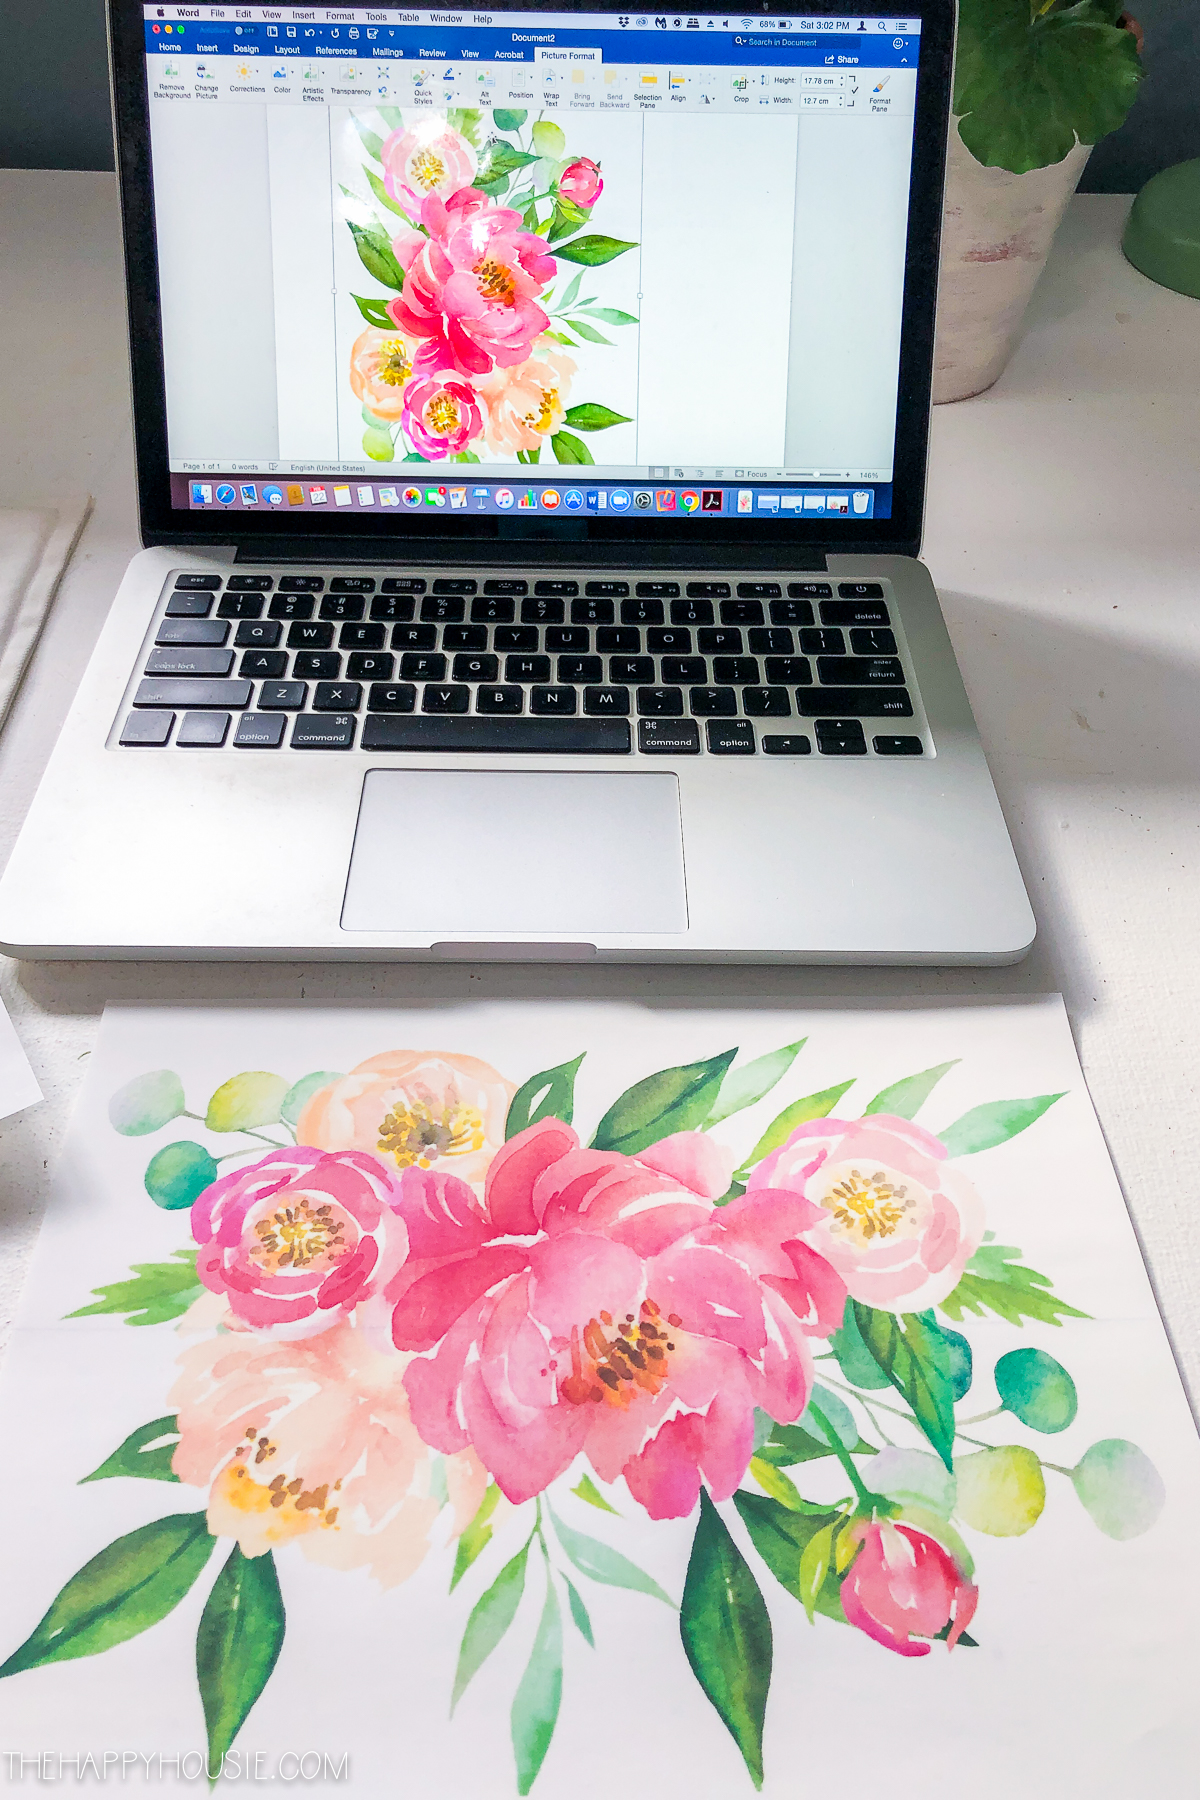 A floral graphic on a laptop.